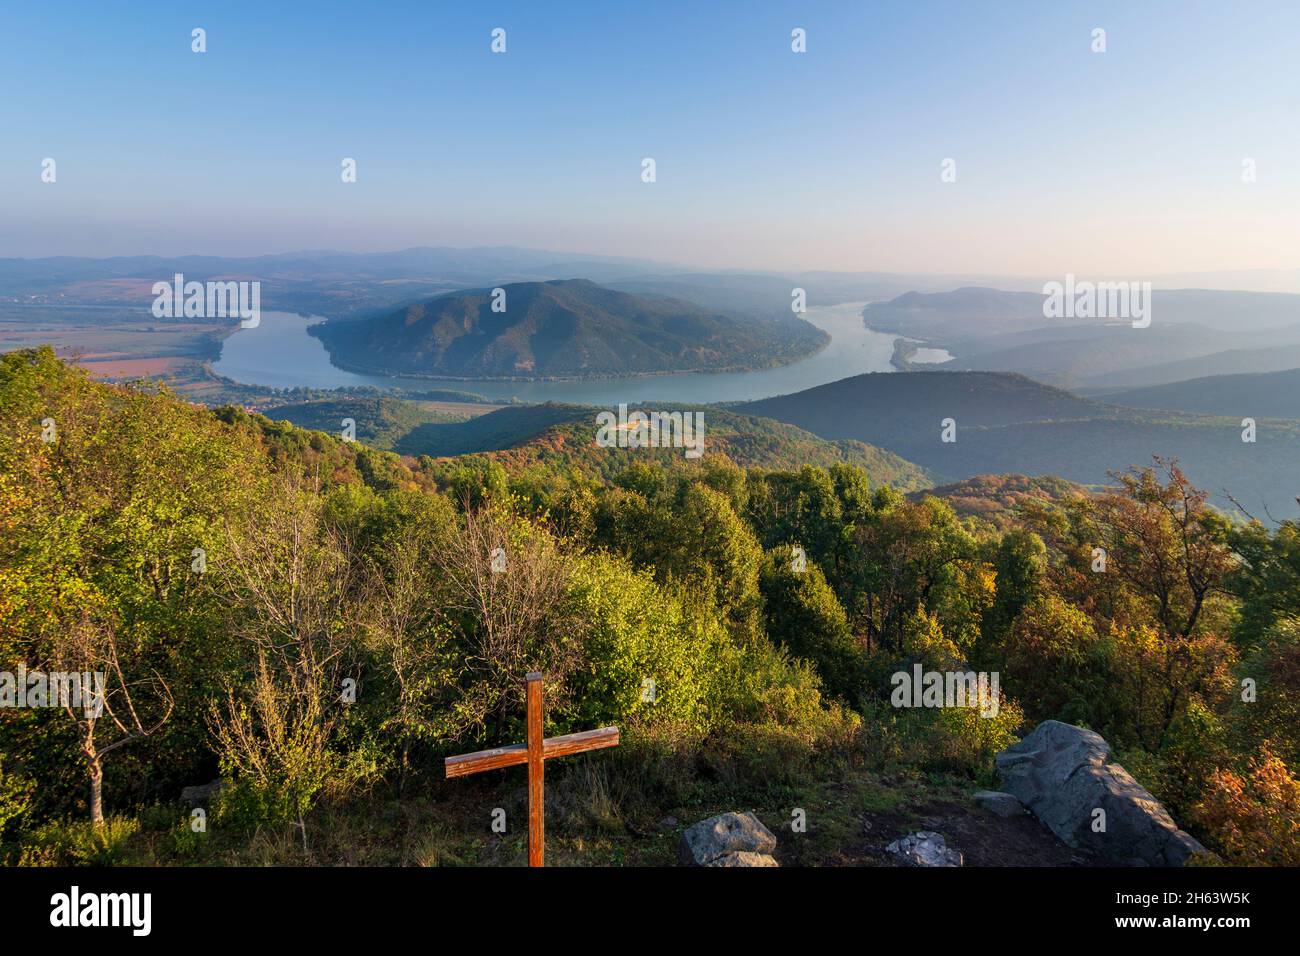 visegrad mountains,bend of danube river,view to börzsöny mountains,view from summit predikaloszek (predigerstuhl,preaching chair) in danube-ipoly national park,pest,hungary Stock Photo